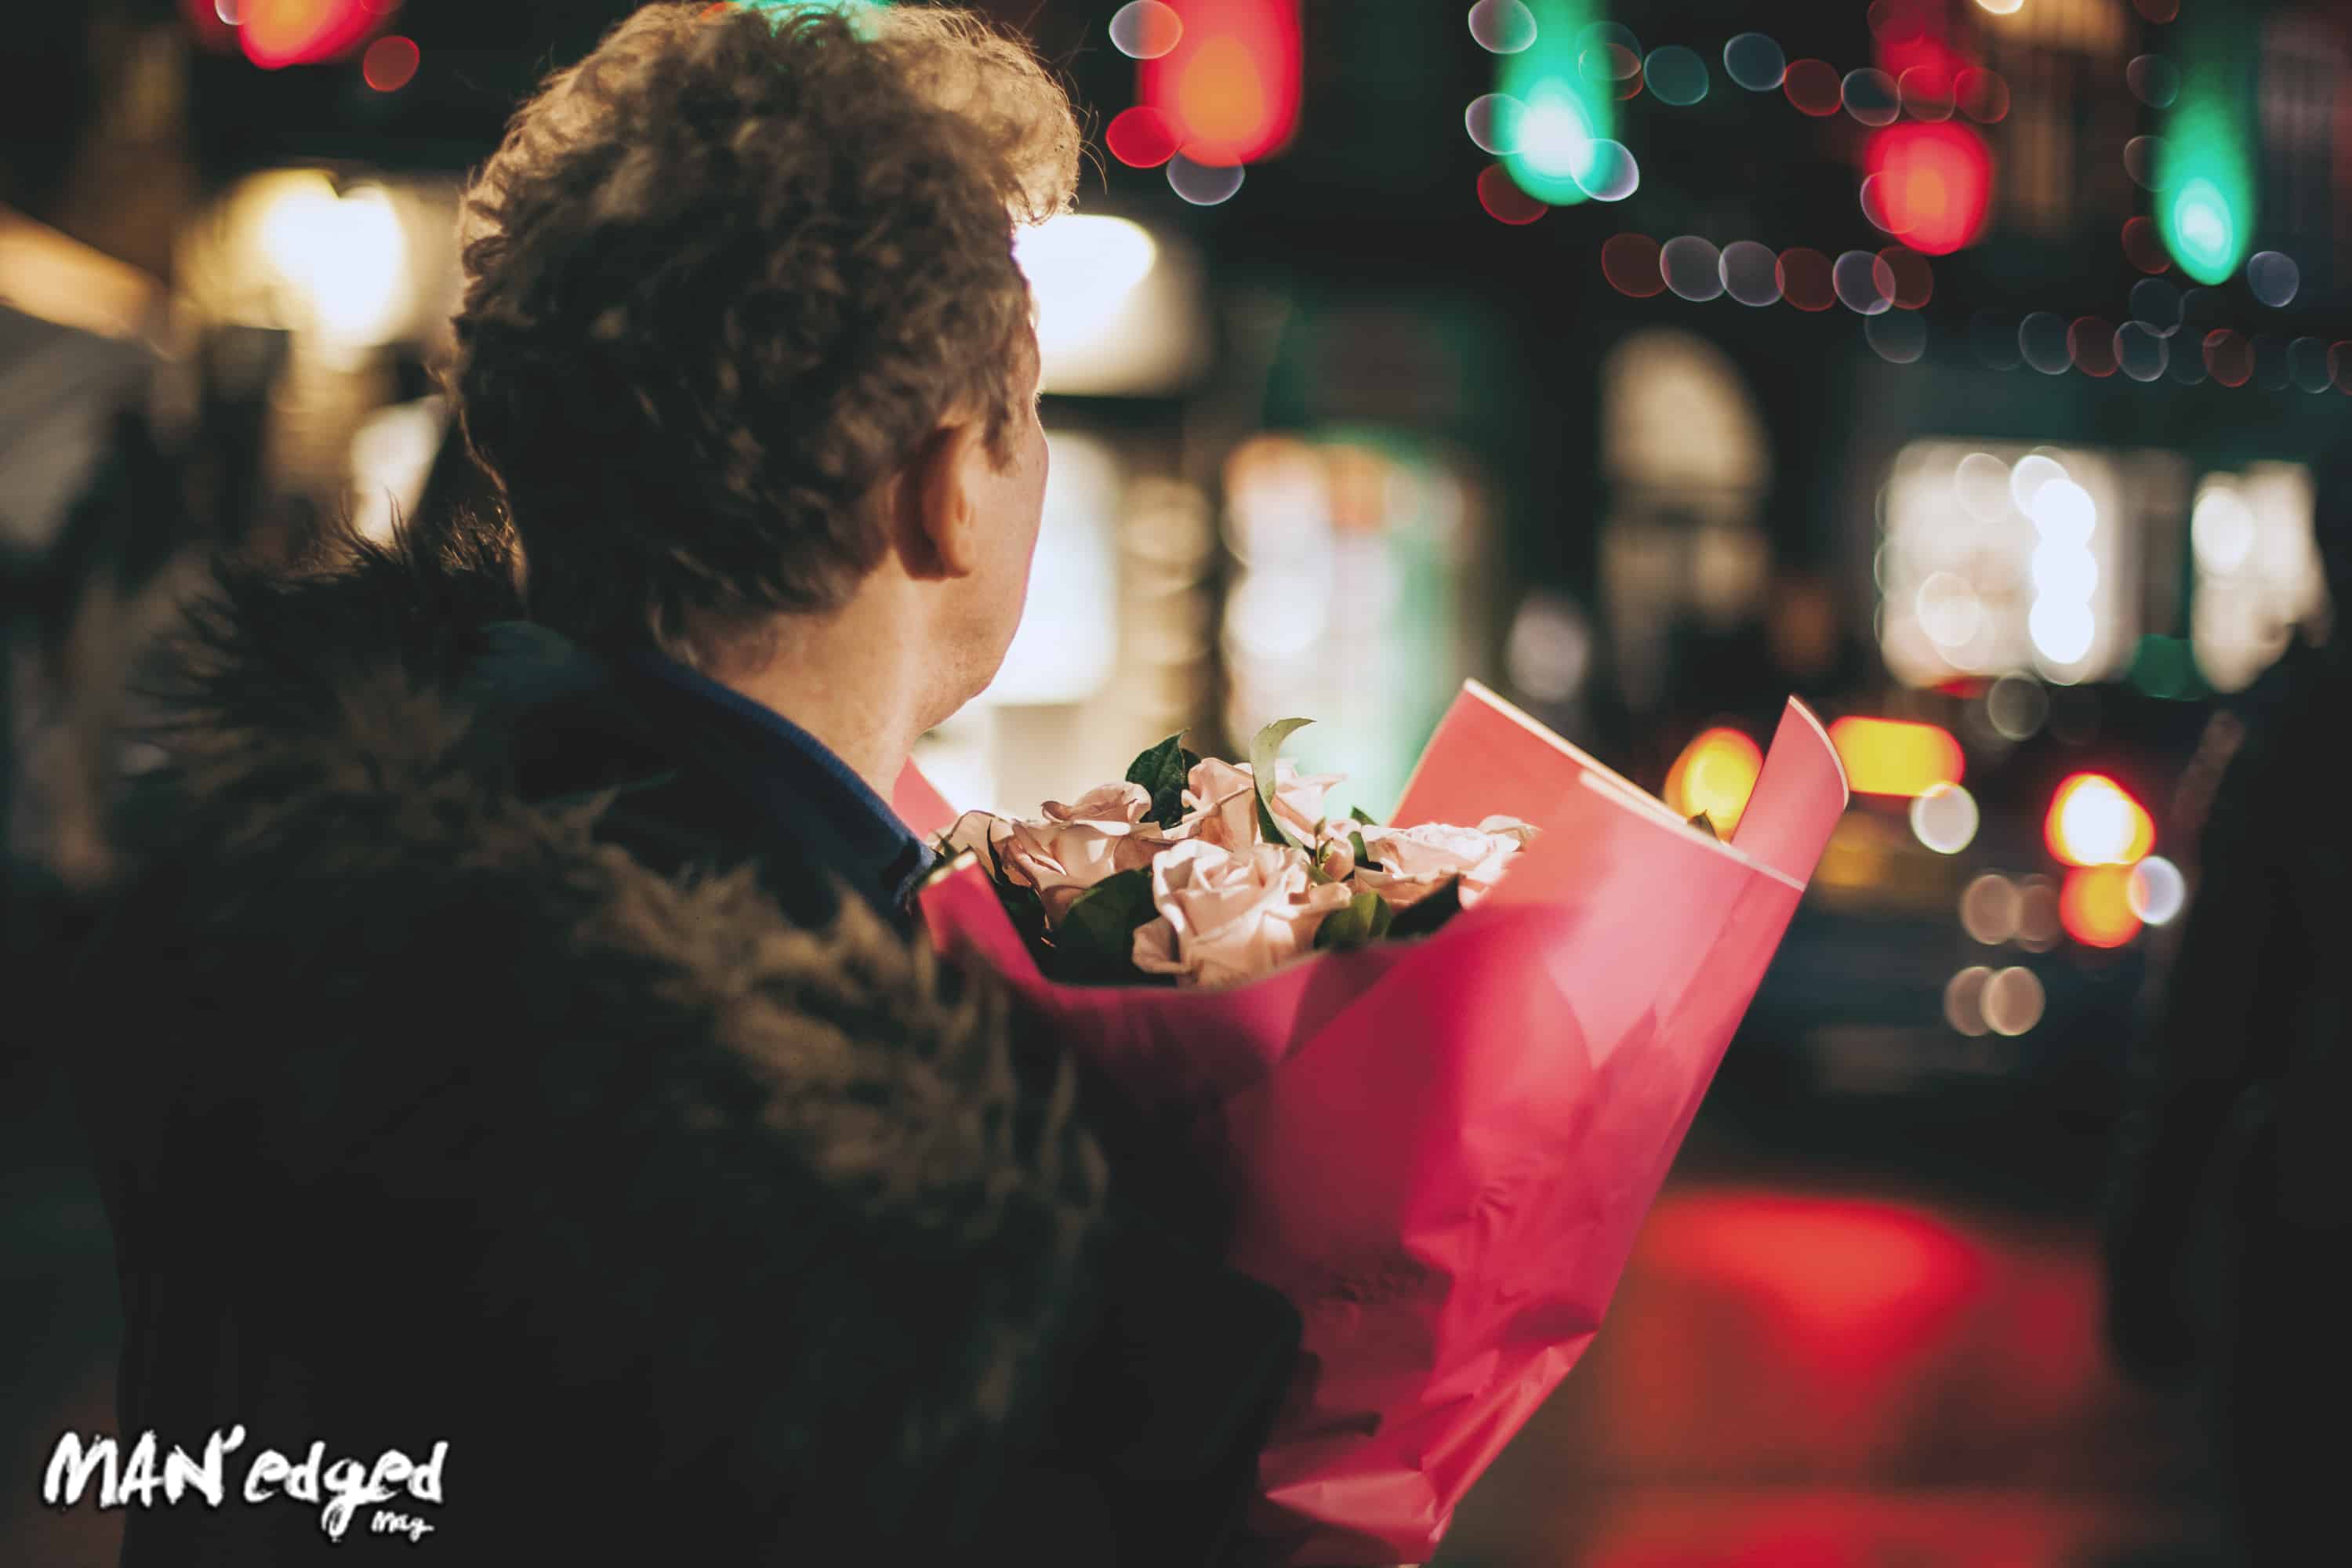 Man holding flowers on first date for MAN'edged Magazine advice column